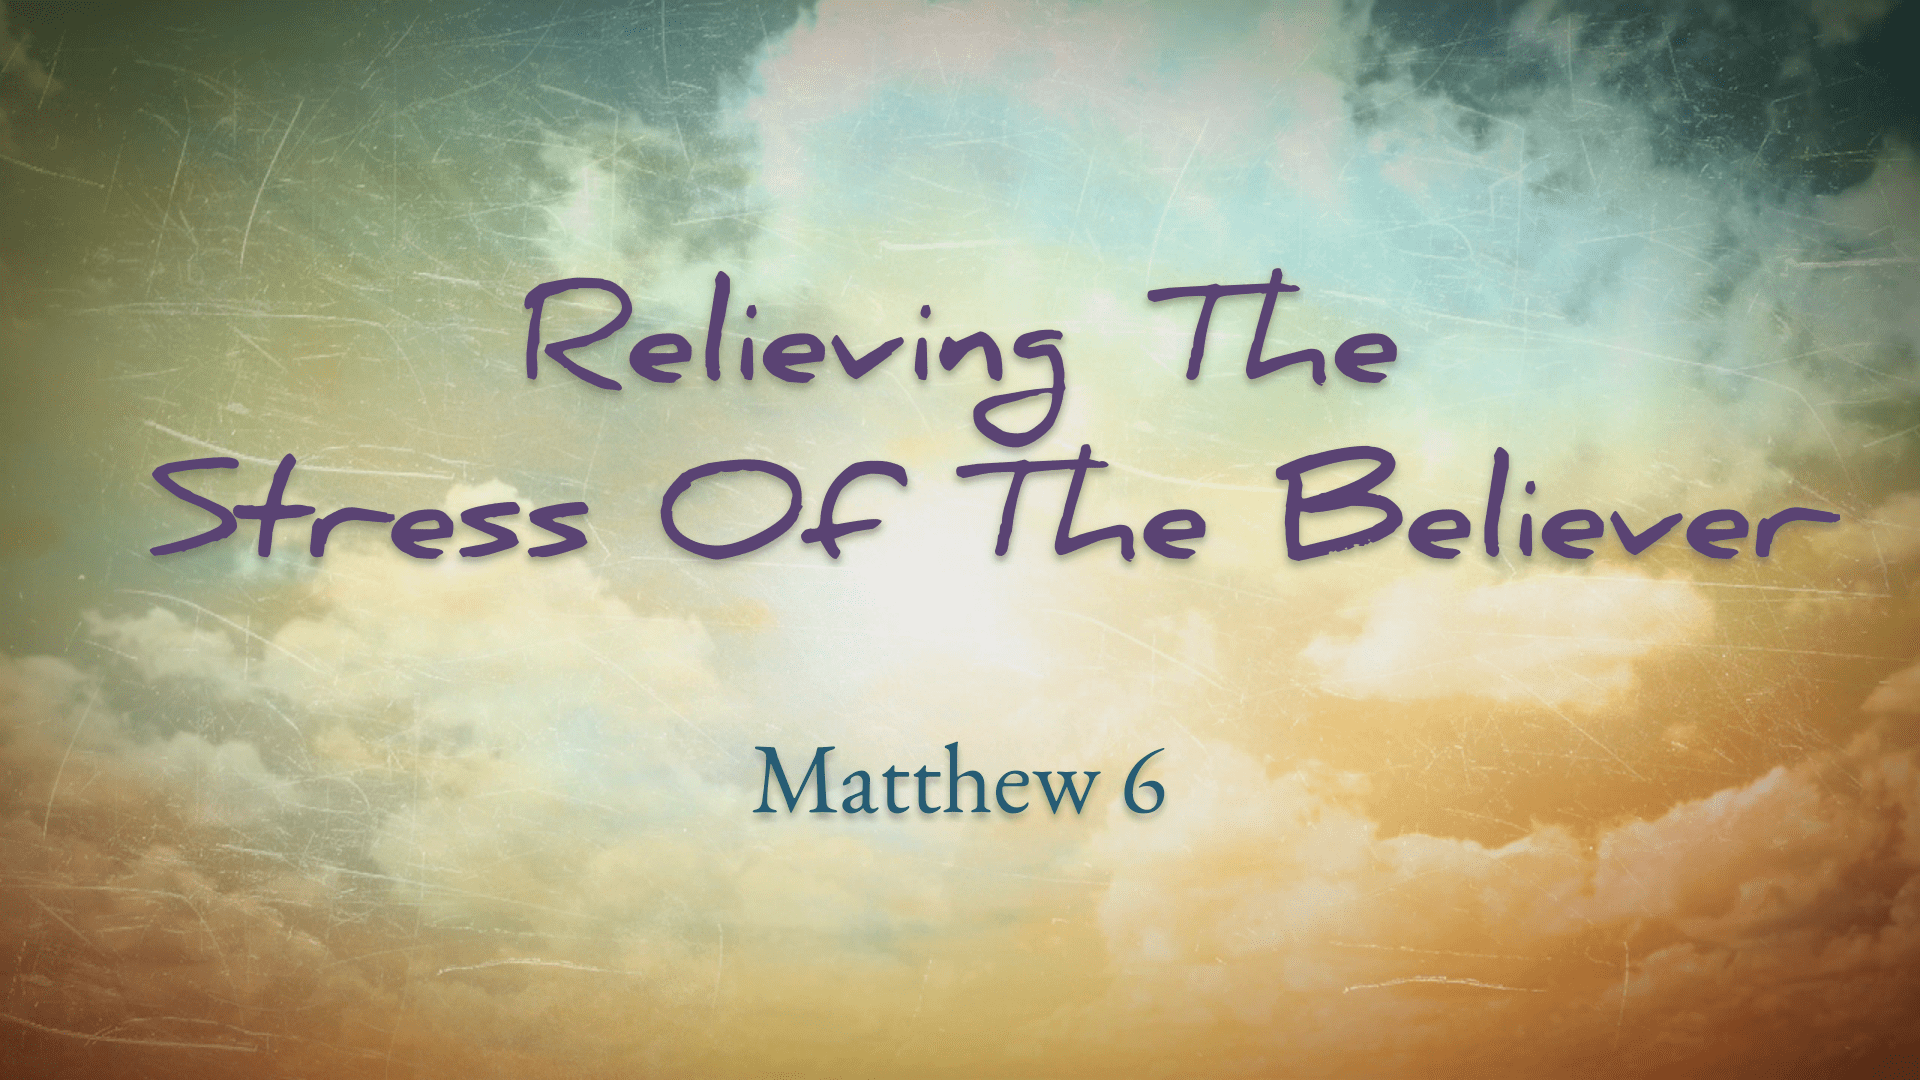 Relieving the Stress Of The Believer